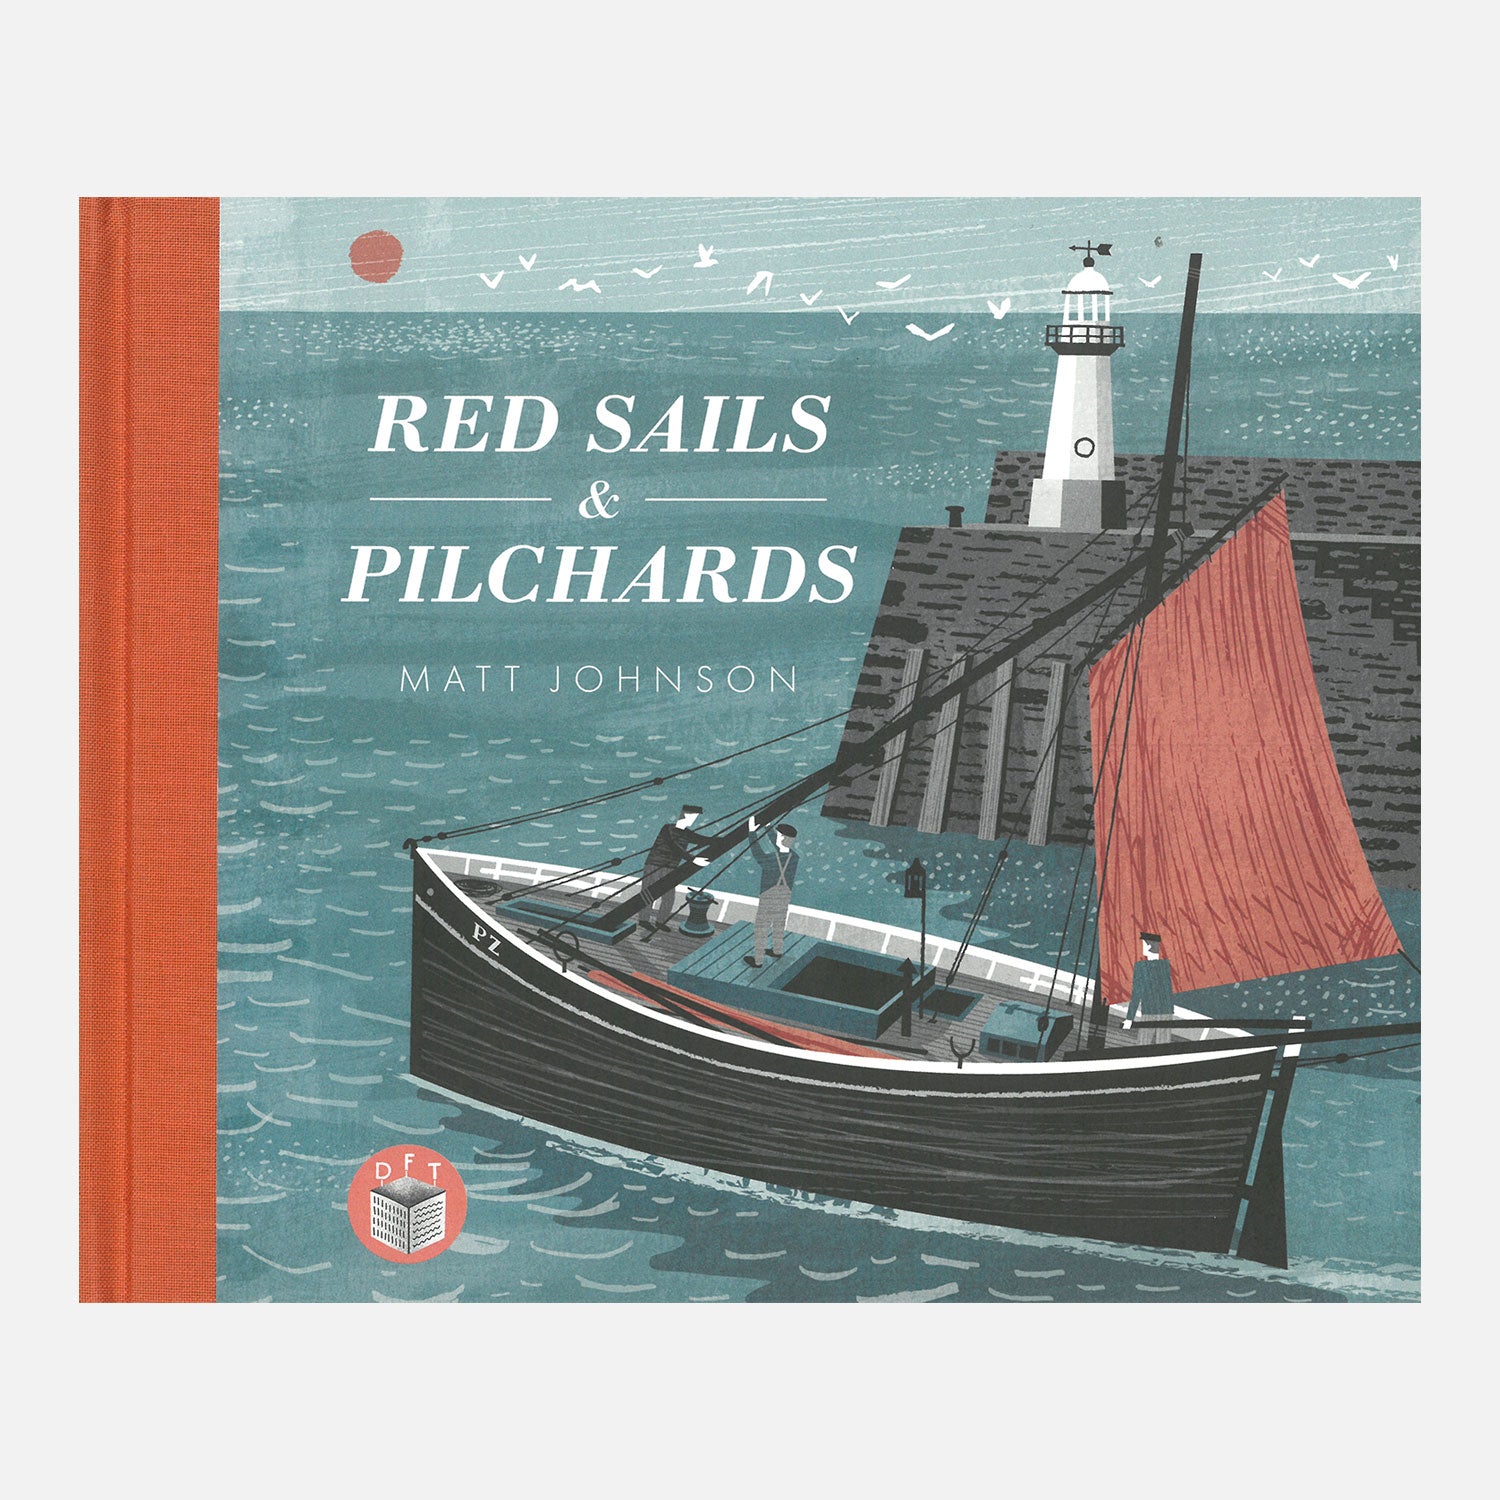 Red sails and pilchards with illustration of wooden boat entering a harbour with a lighthouse